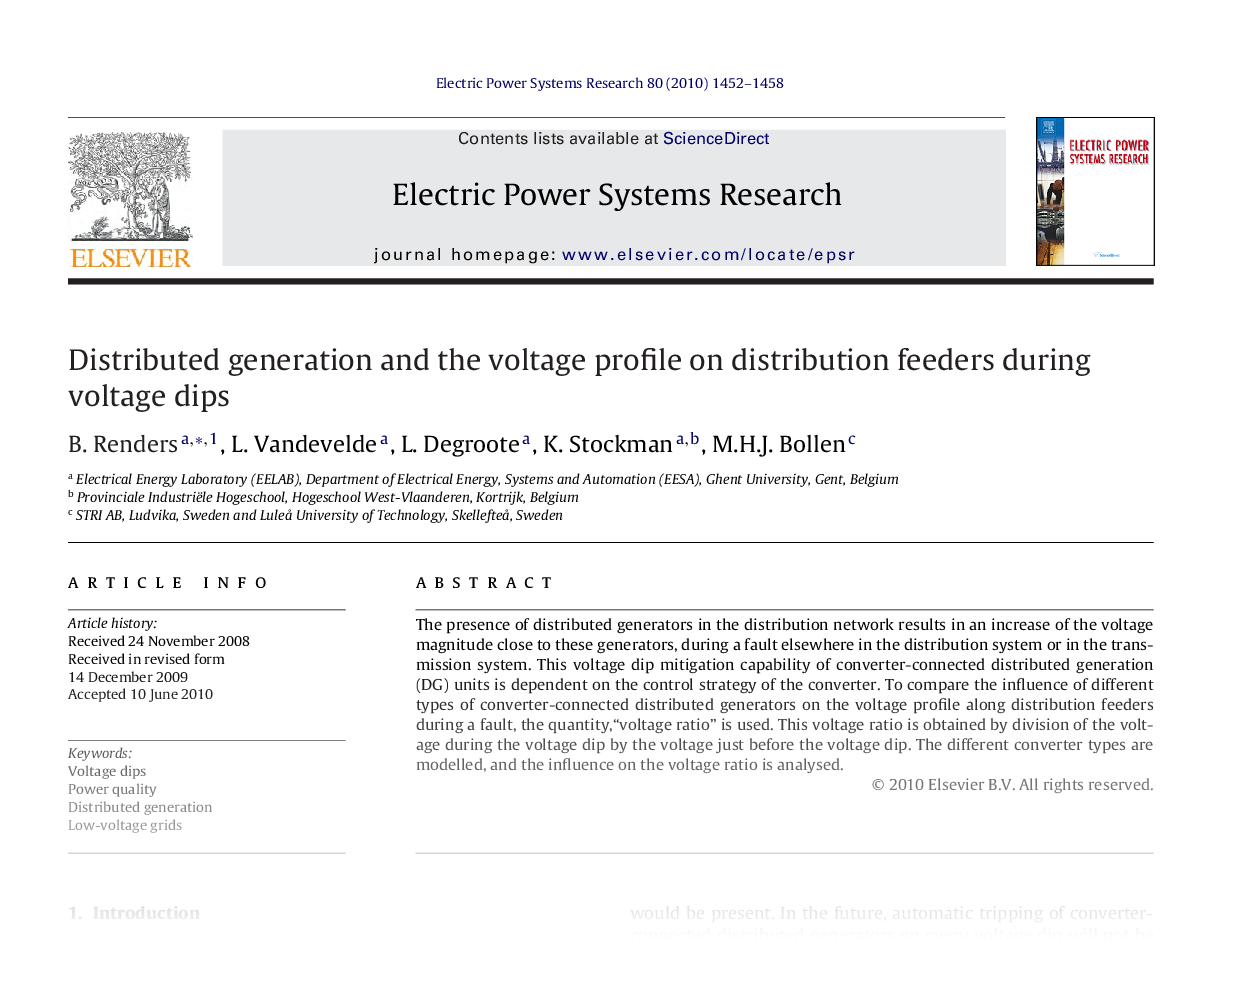 Distributed Generation and the Voltage Profile on Distribution Feeders during Voltage Dips